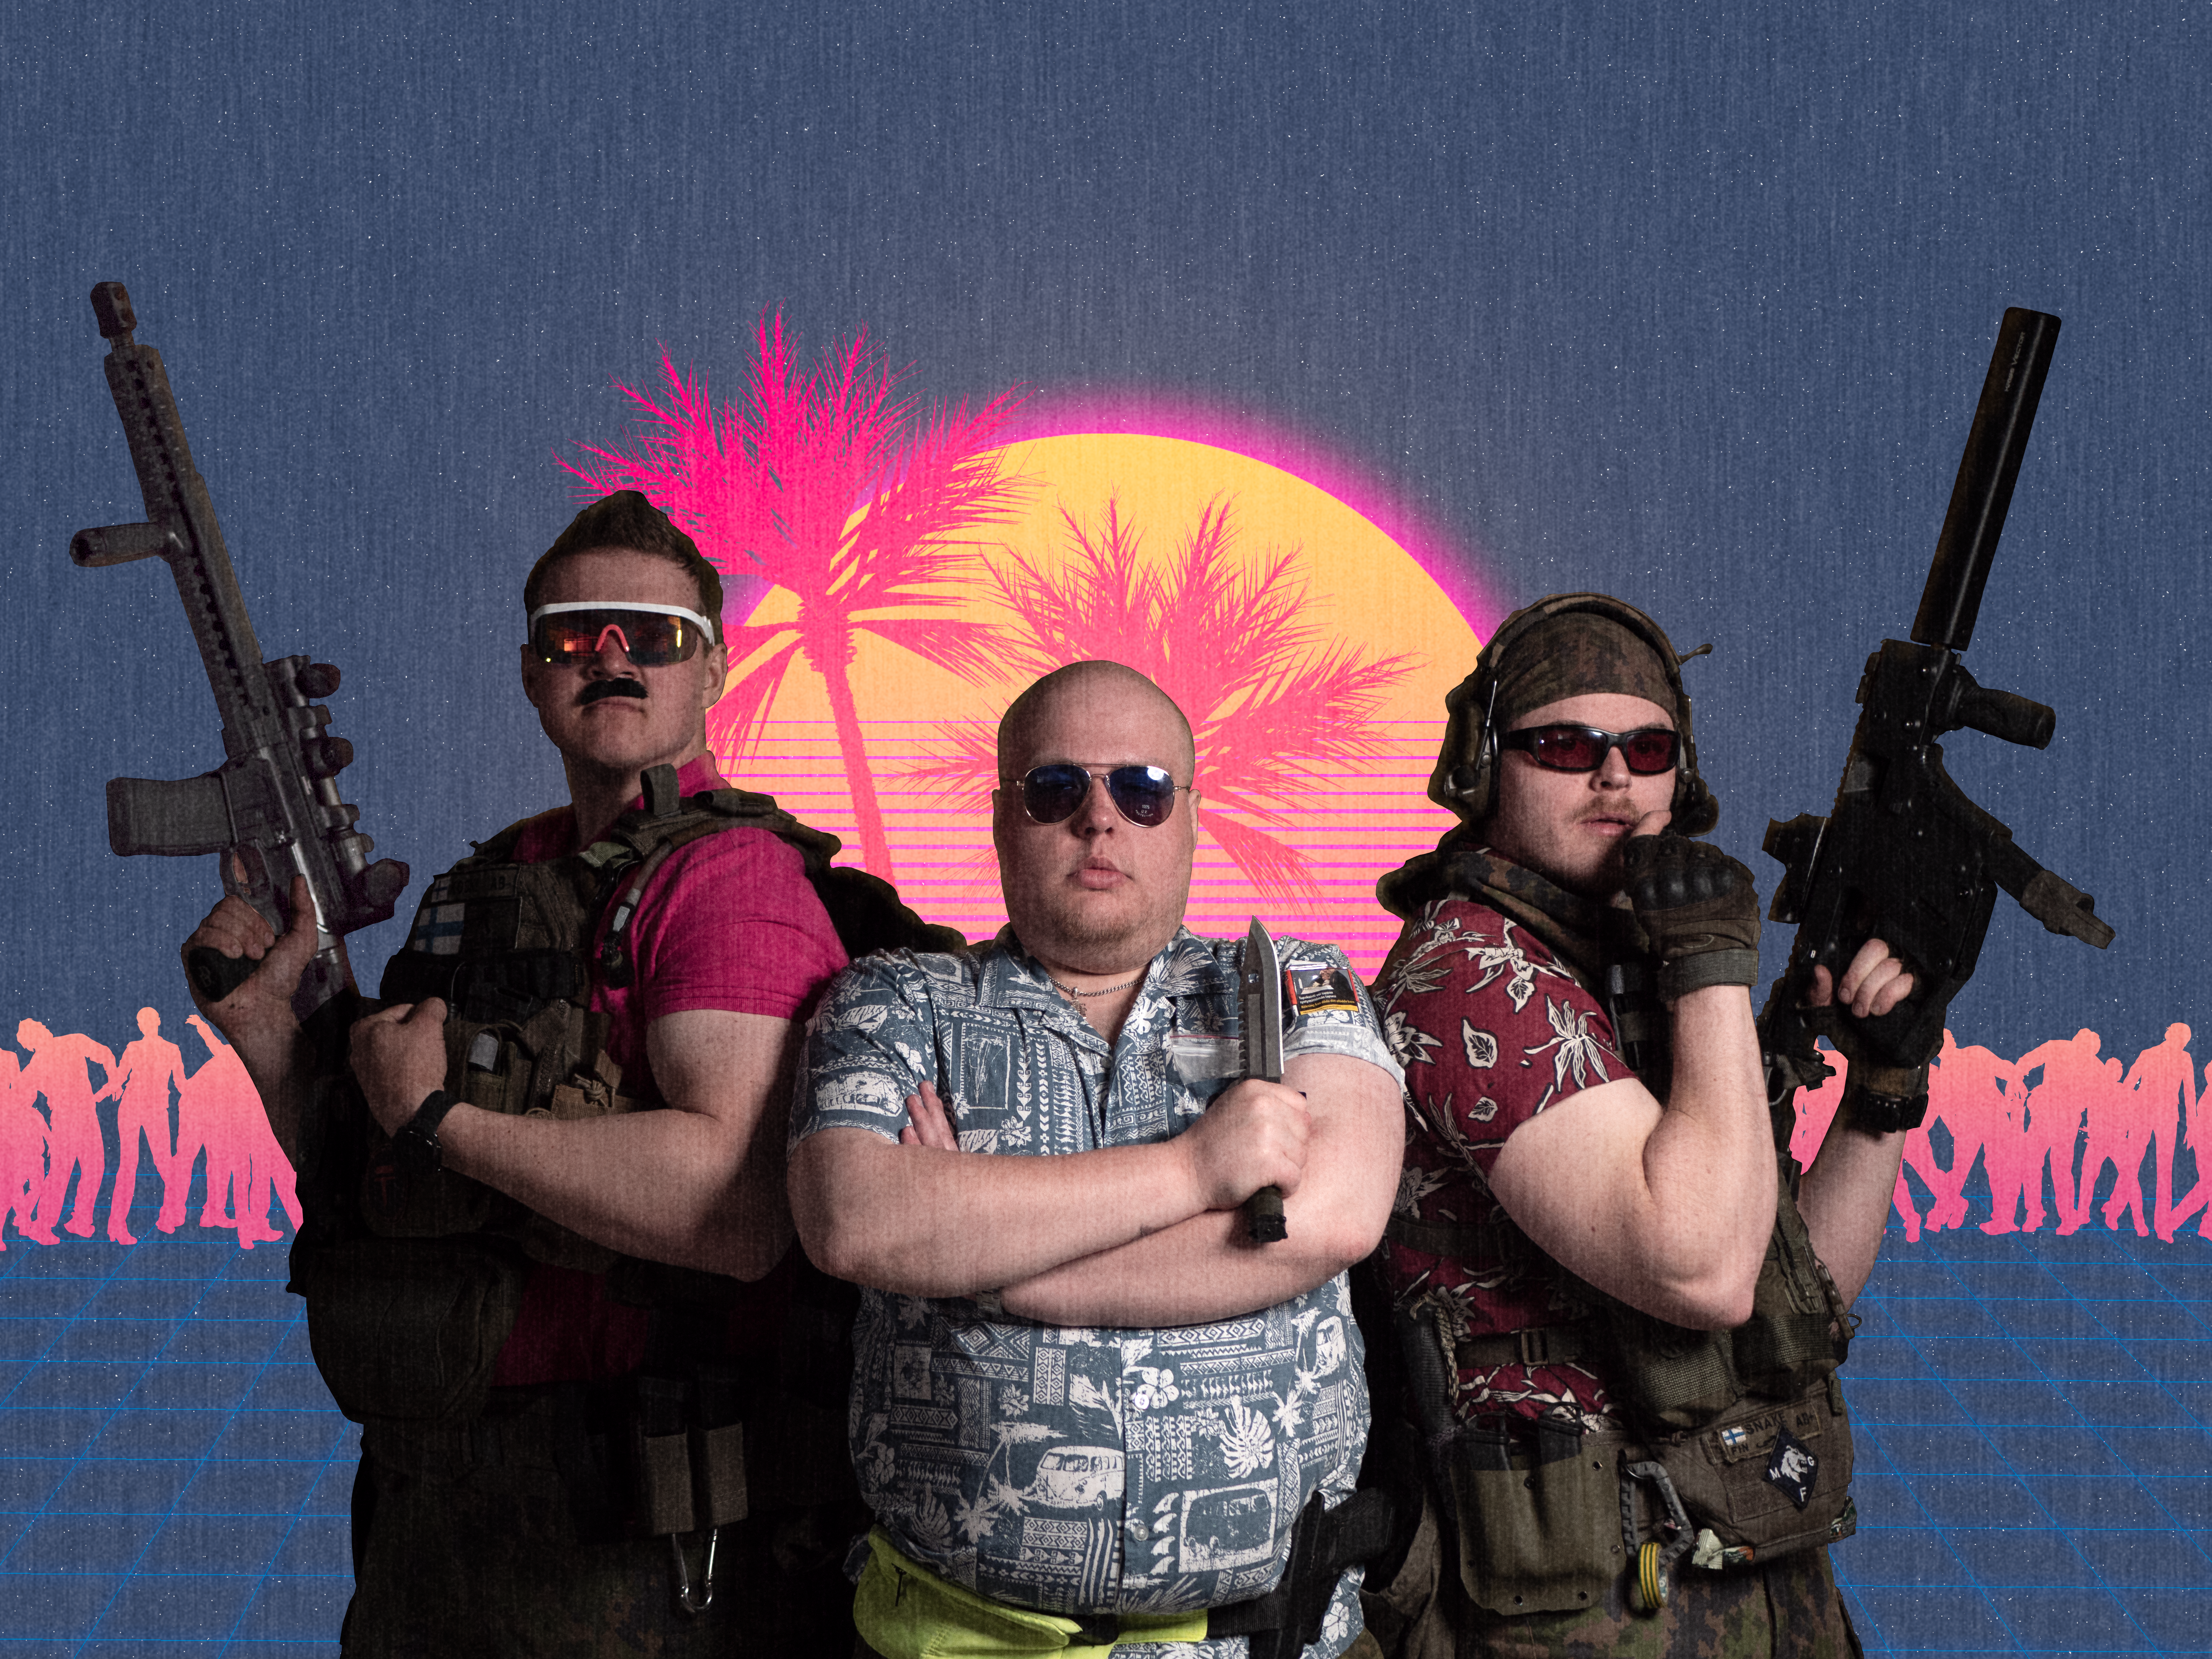 Three men with weapons standing infront of a retrowave background.